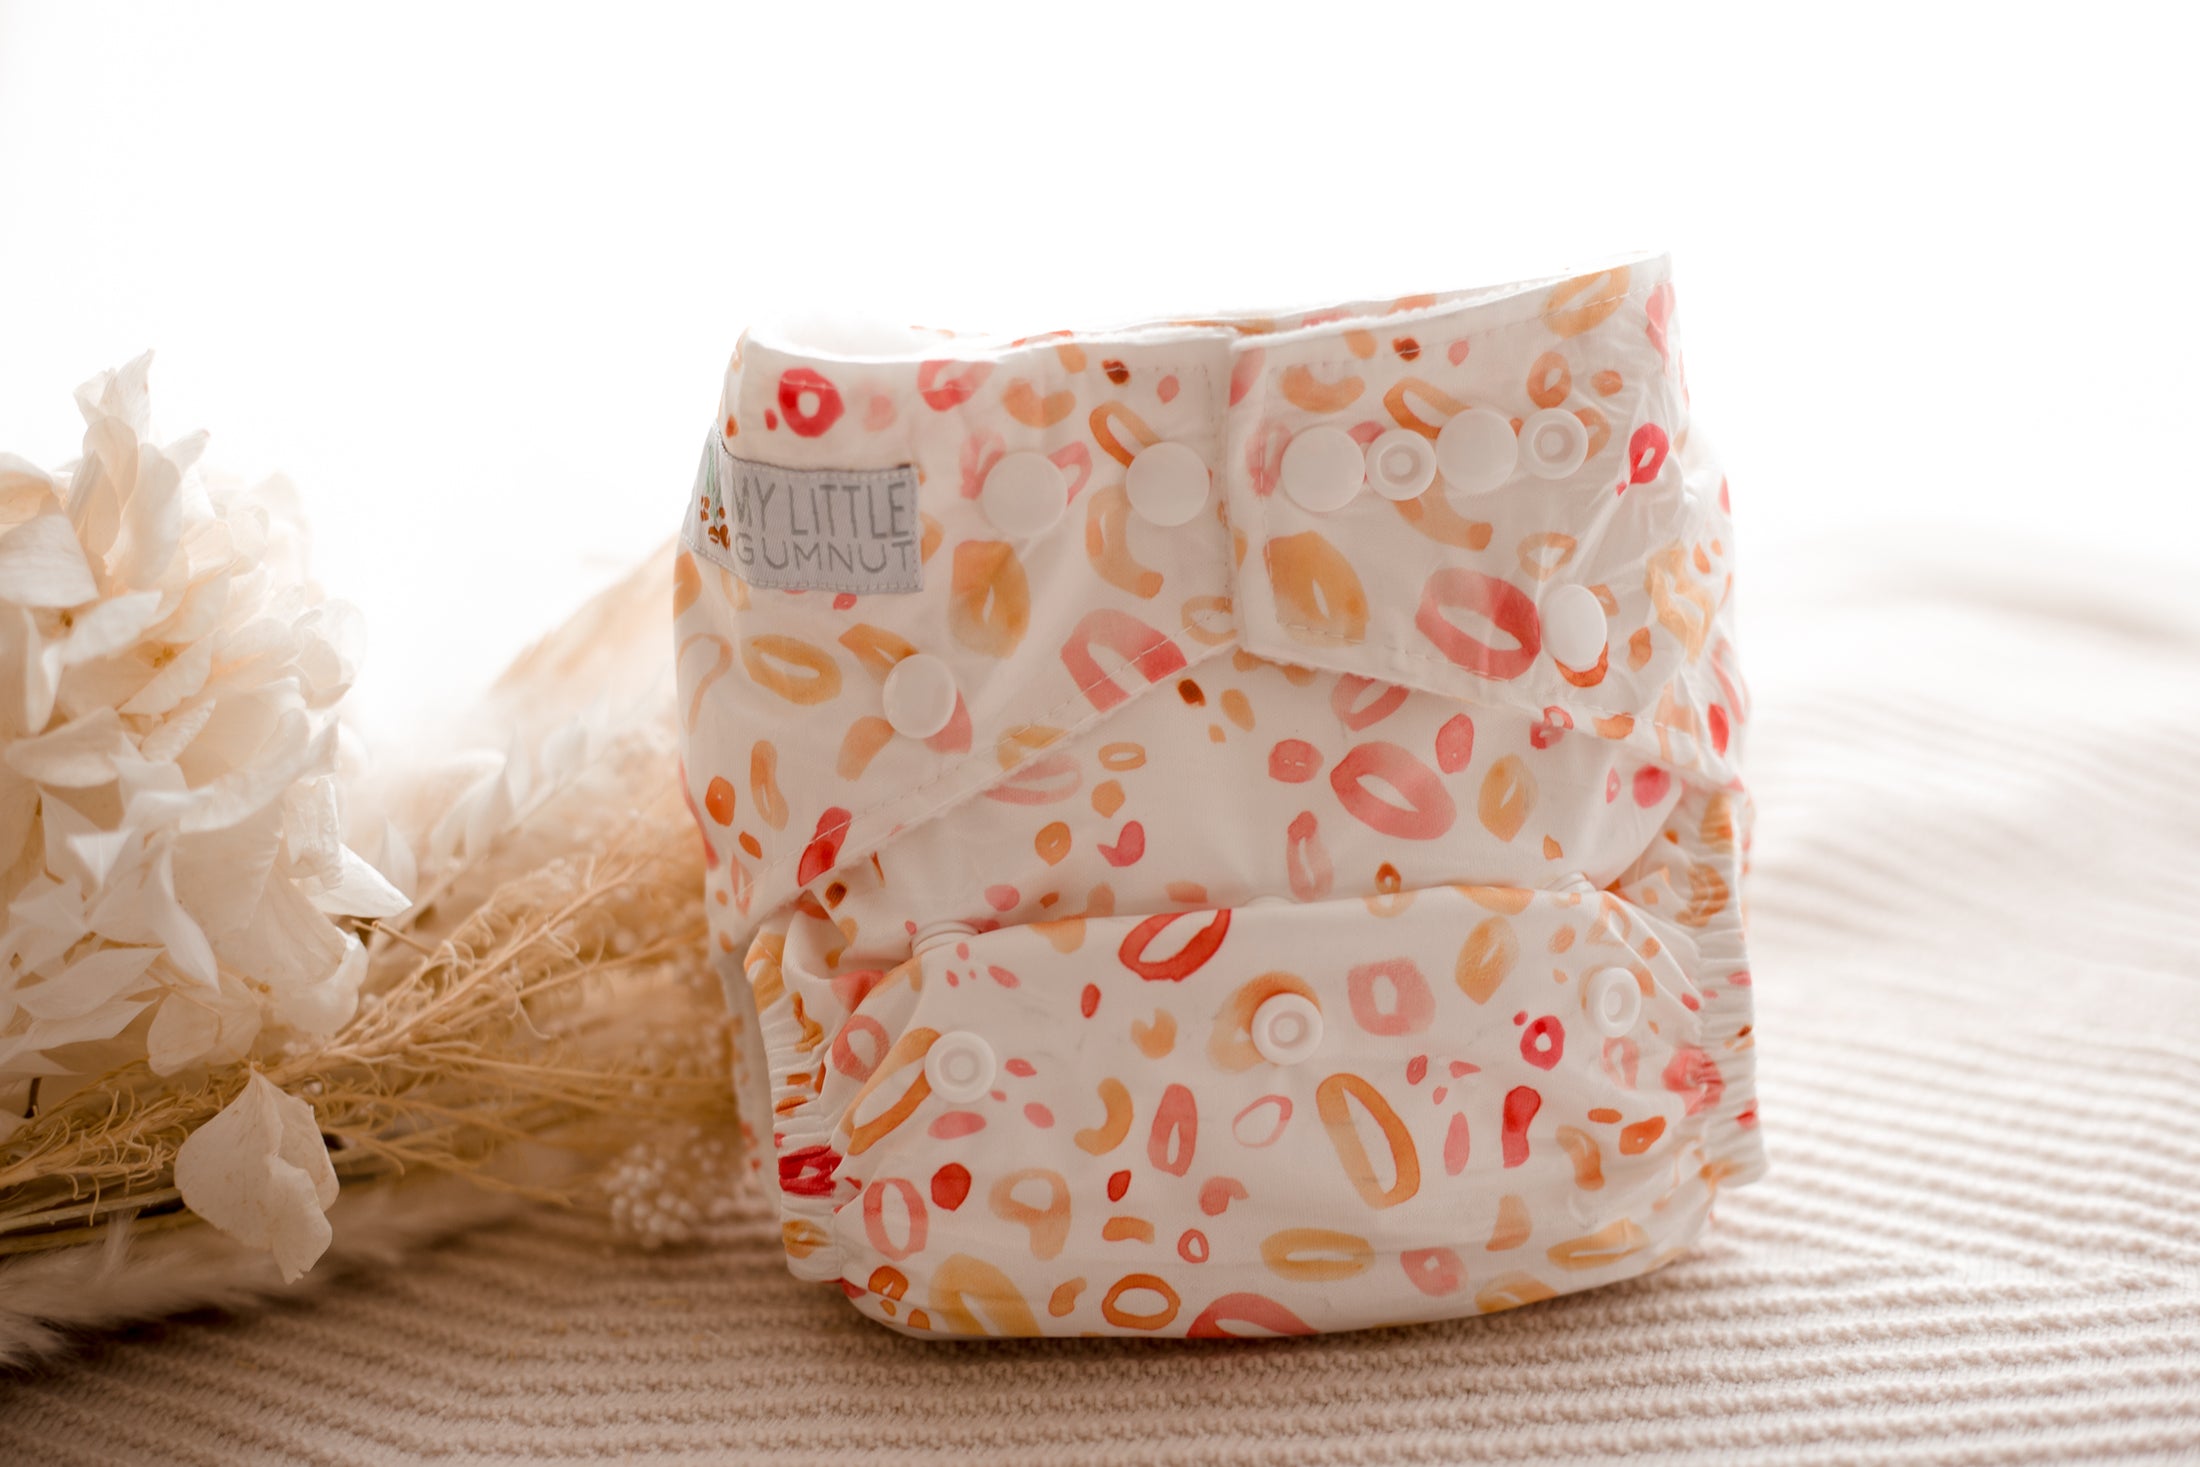 Australian cloth nappies. Reusable diapers. water colour cloth nappy. My little gumnut. reusable nappies australia.